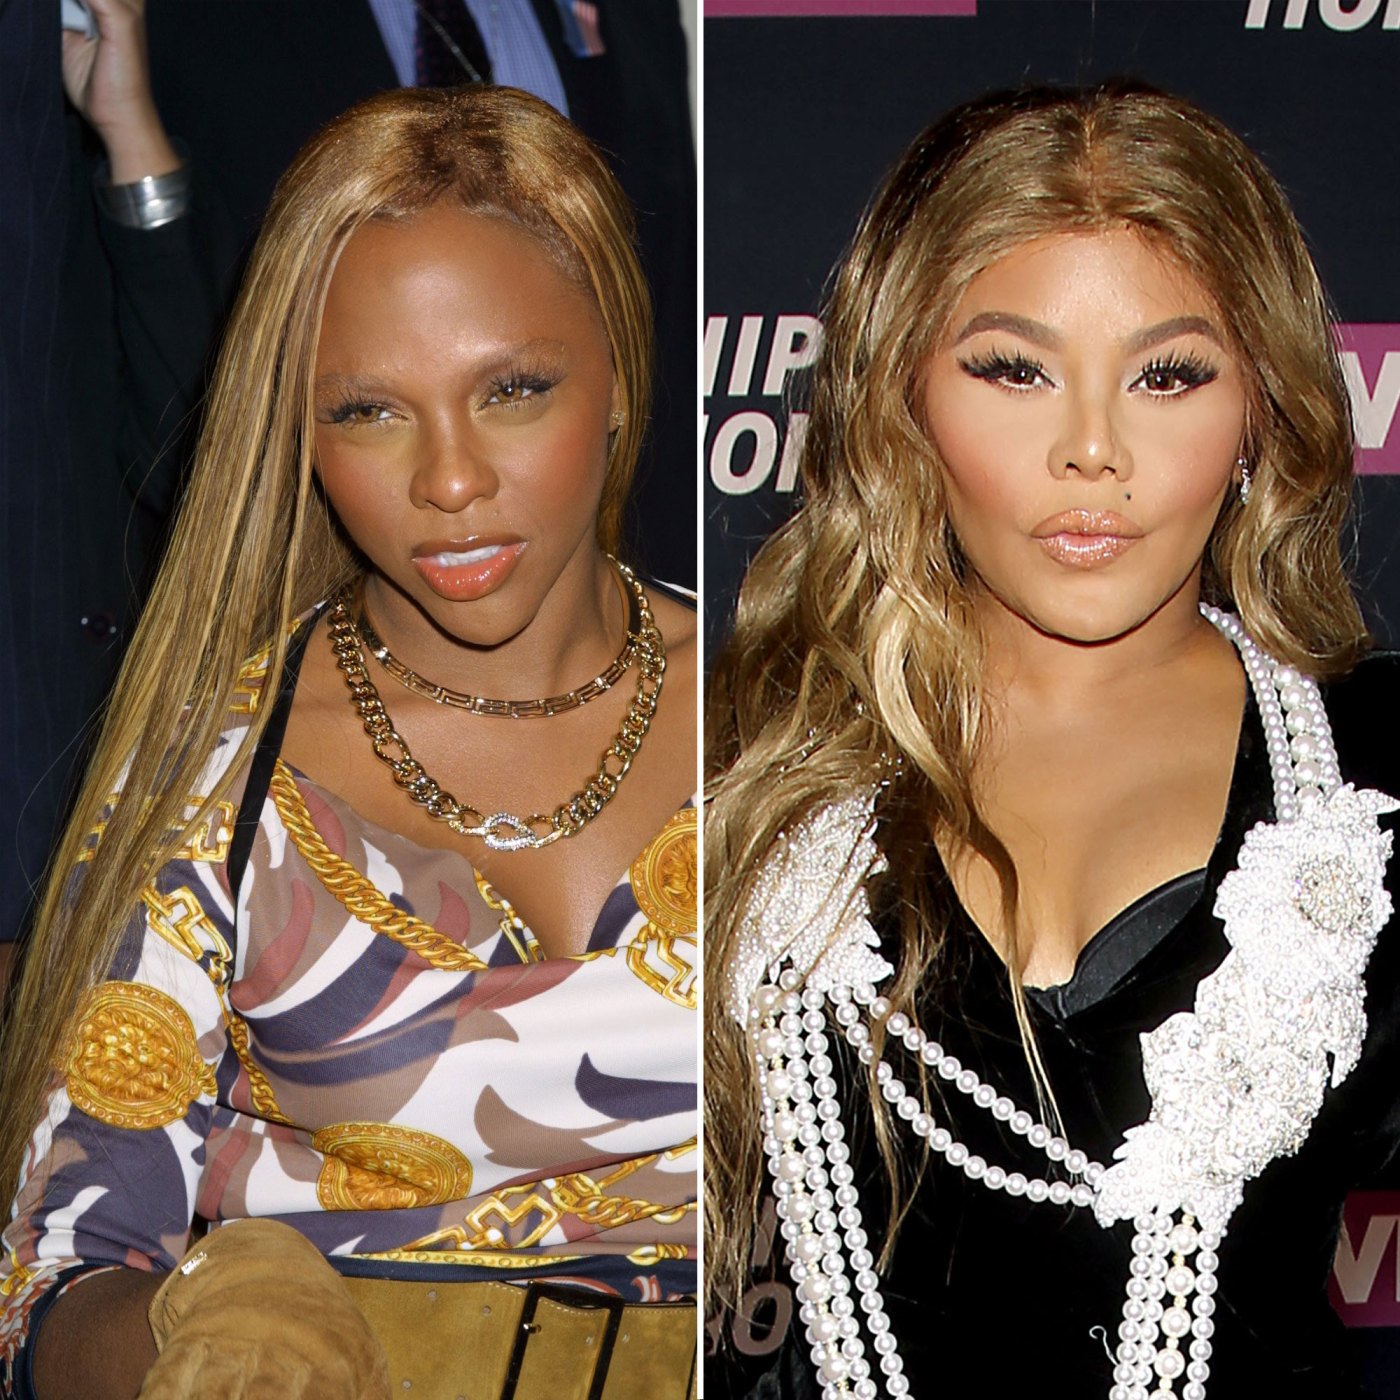 Lil' Kim How Her Face Has Changed